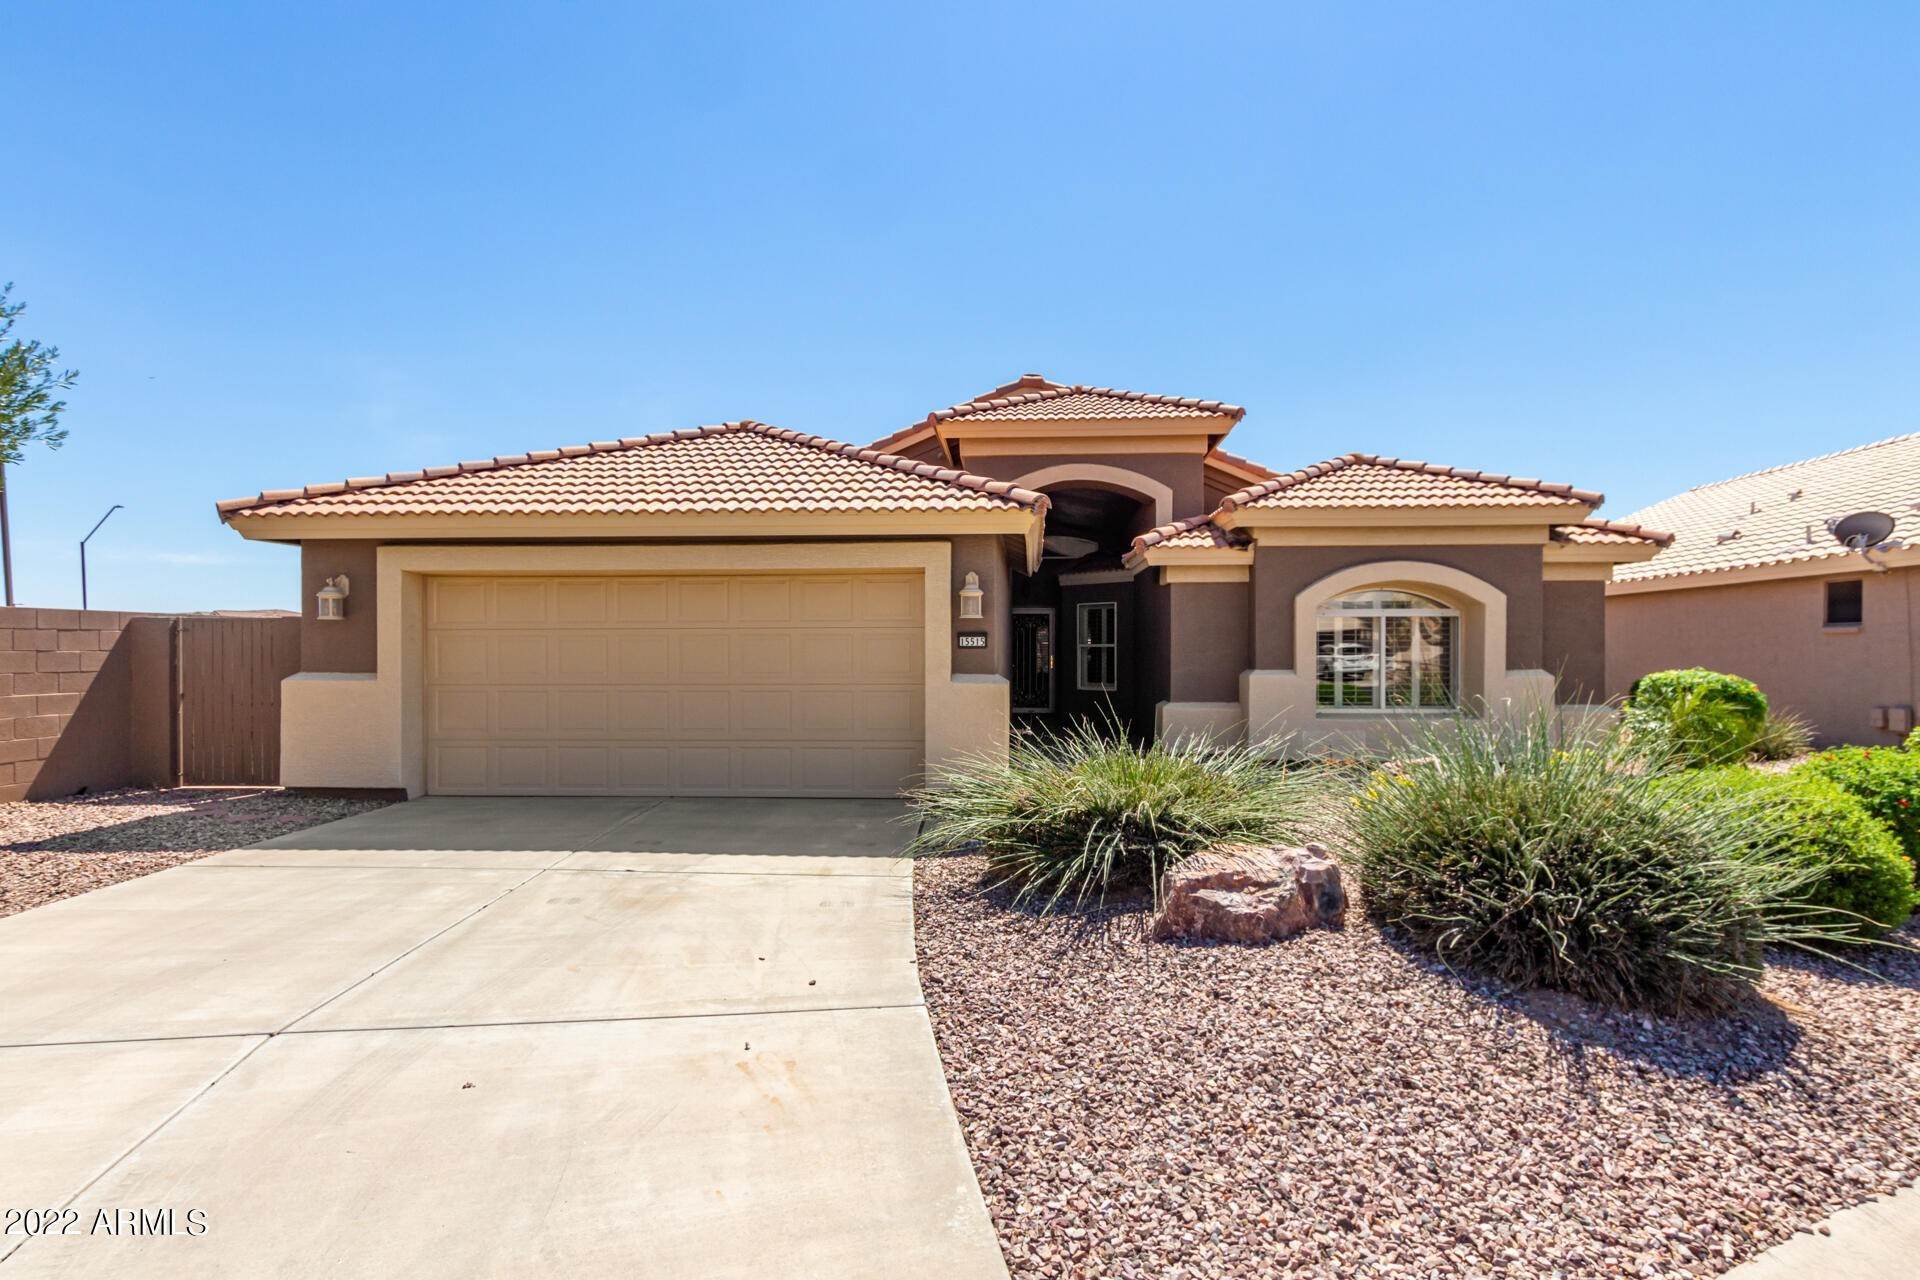 1. Single Family for Sale at Goodyear, AZ 85395